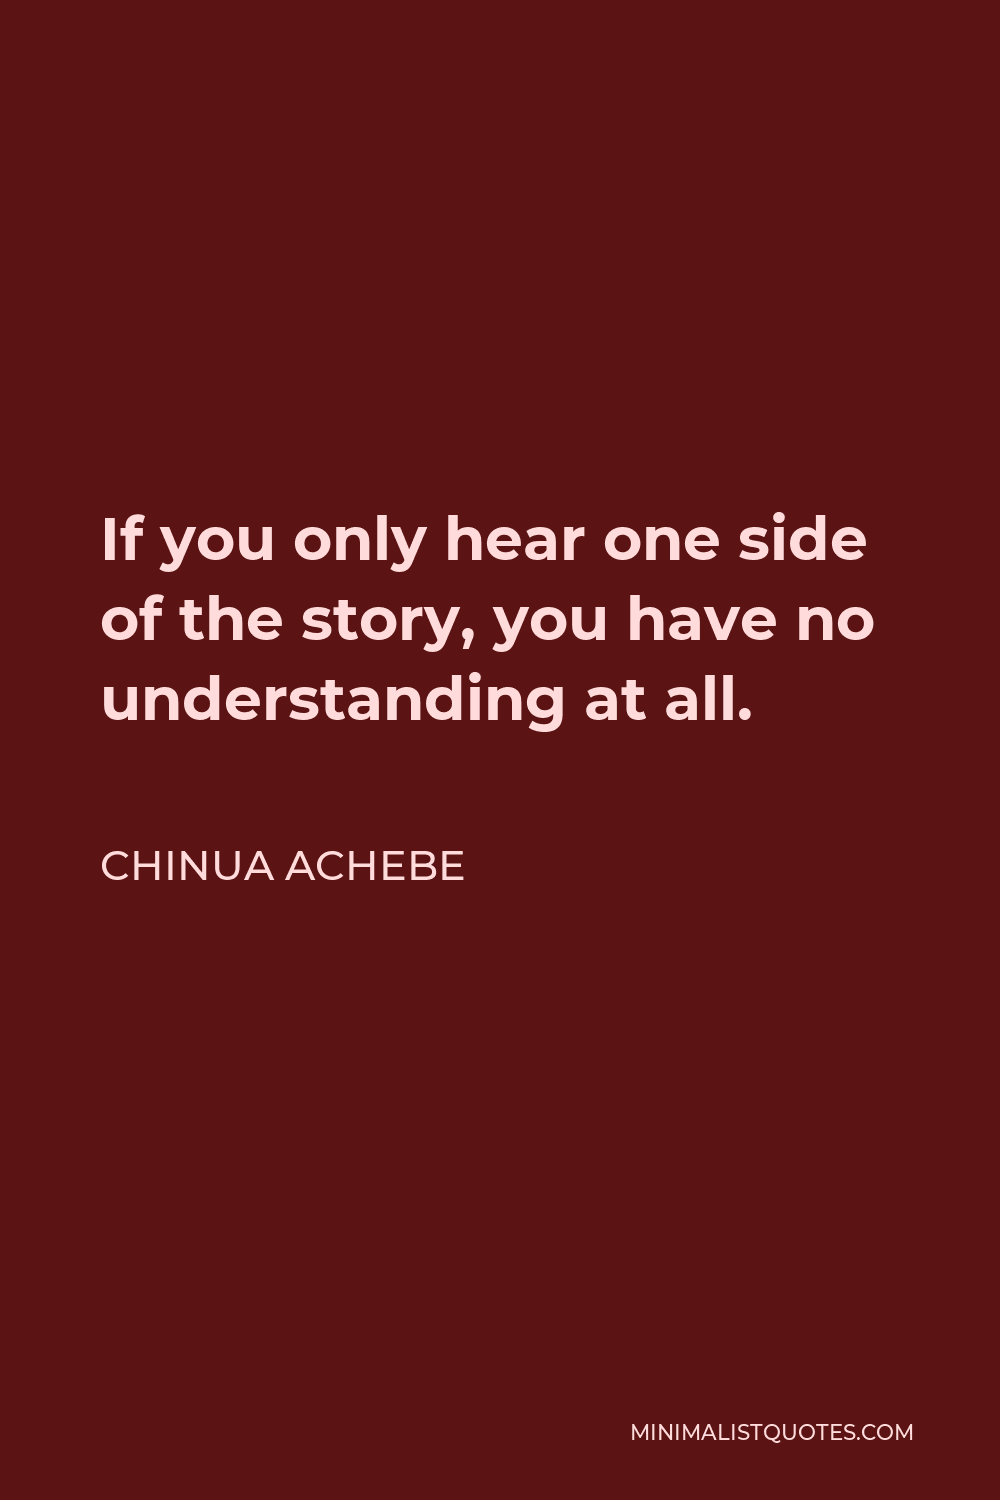 Chinua Achebe Quote - If you only hear one side of the story, you have no understanding at all.